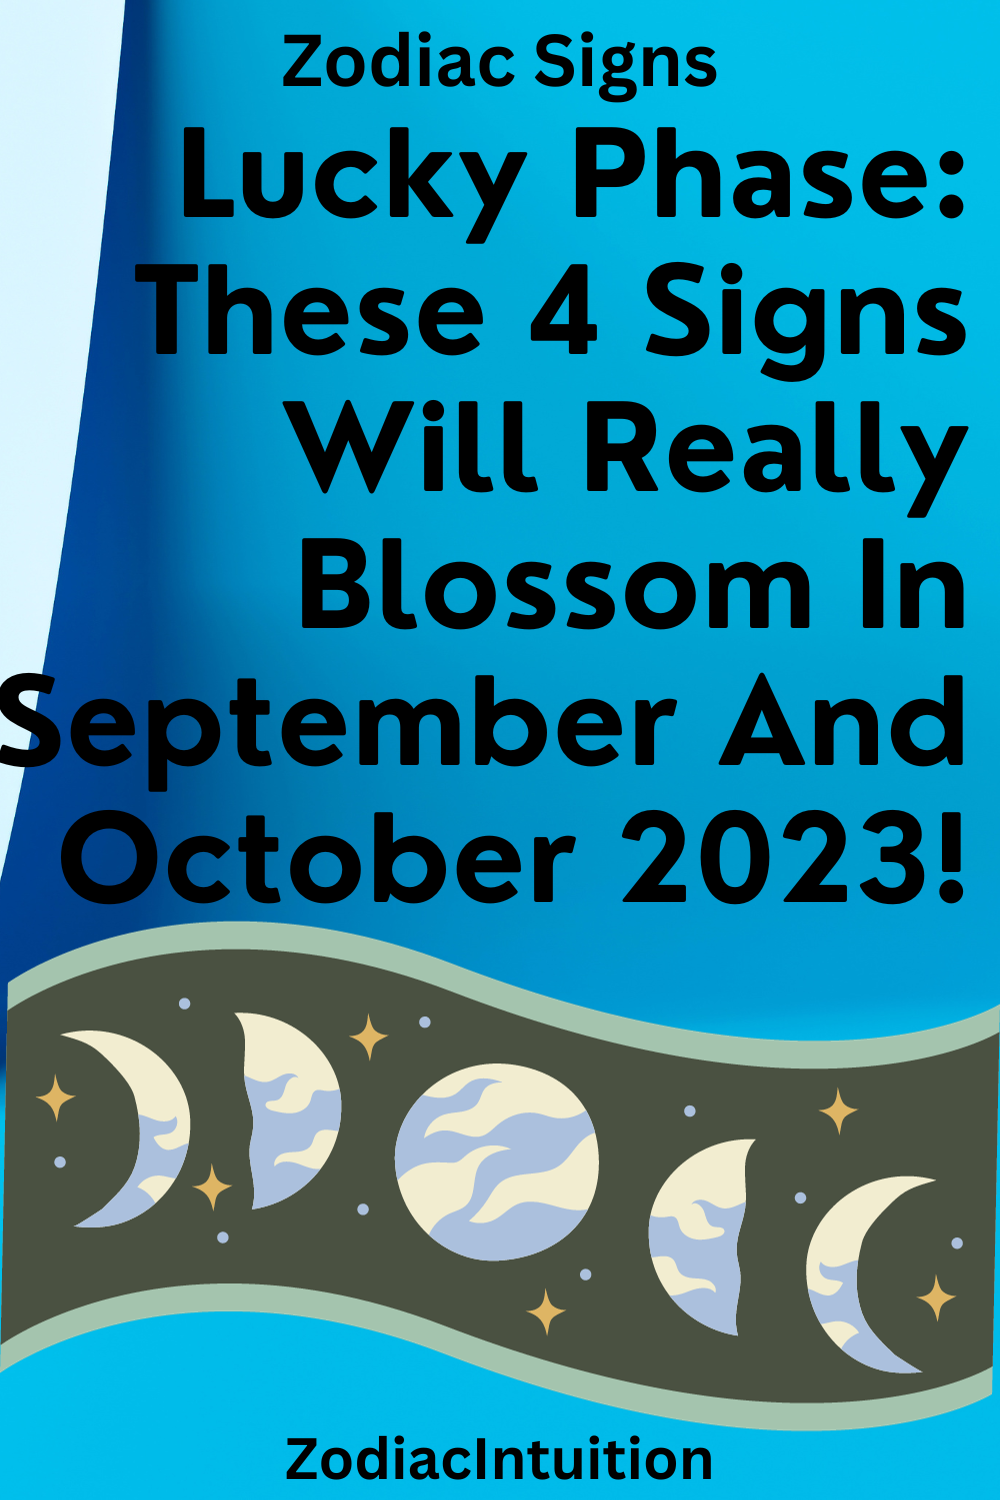 Lucky Phase: These 4 Signs Will Really Blossom In September And October 2023!